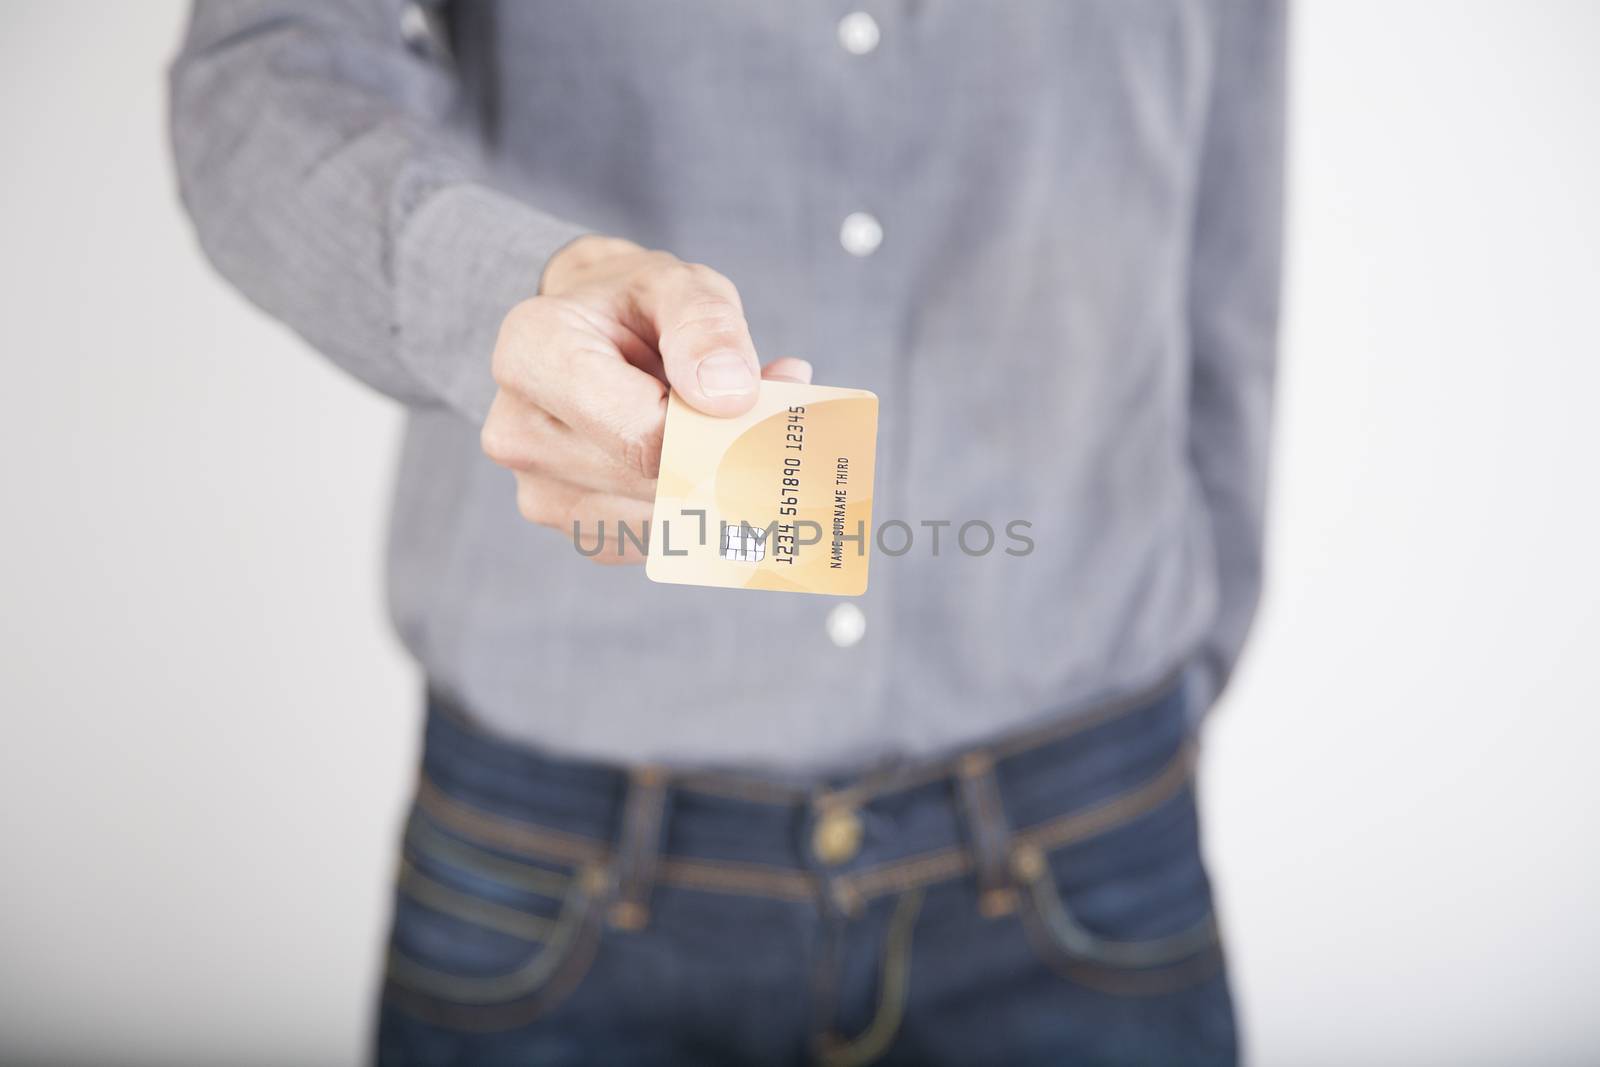 woman blue jeans trousers and grey shirt offering made up fiction credit card in her hands isolated over white background